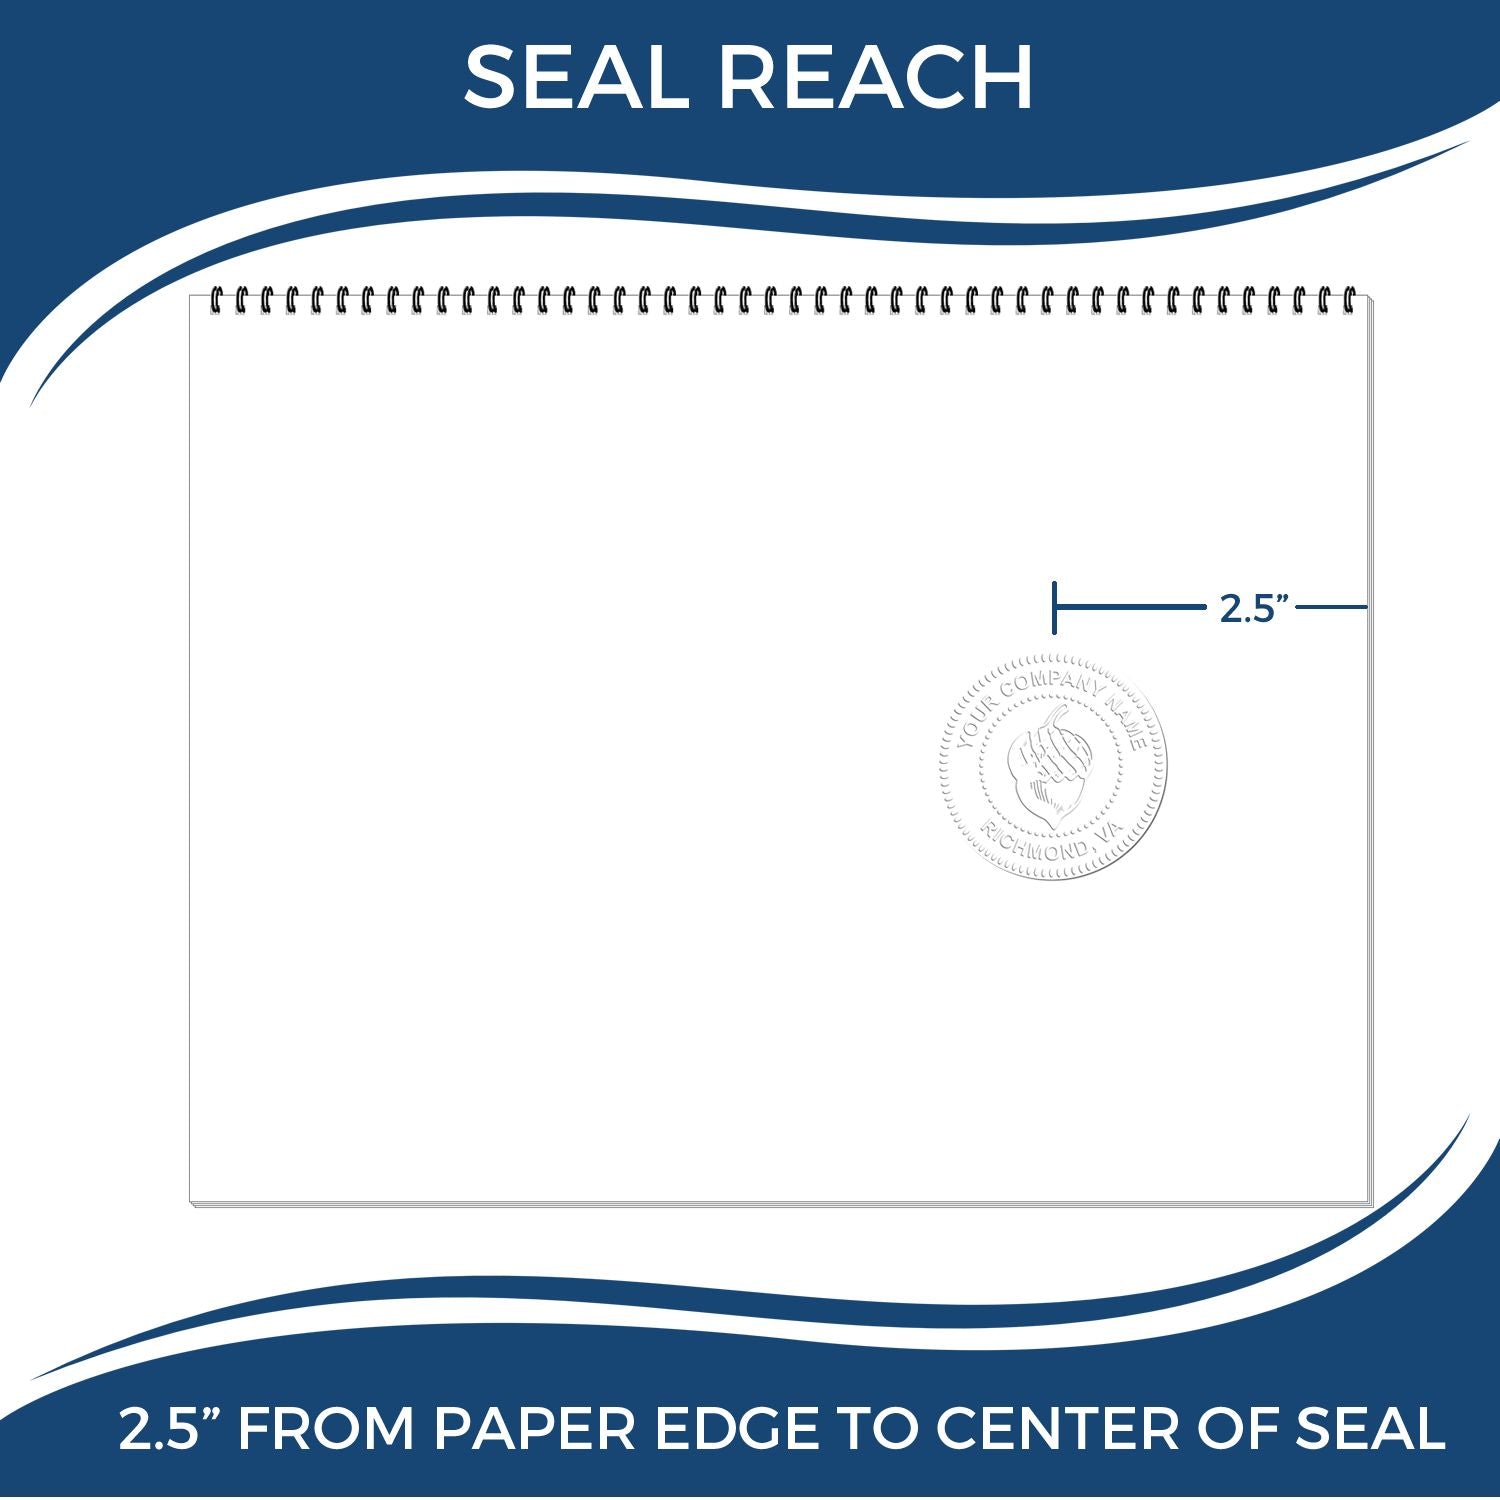 An infographic showing the seal reach which is represented by a ruler and a miniature seal image of the Long Reach Wisconsin Geology Seal